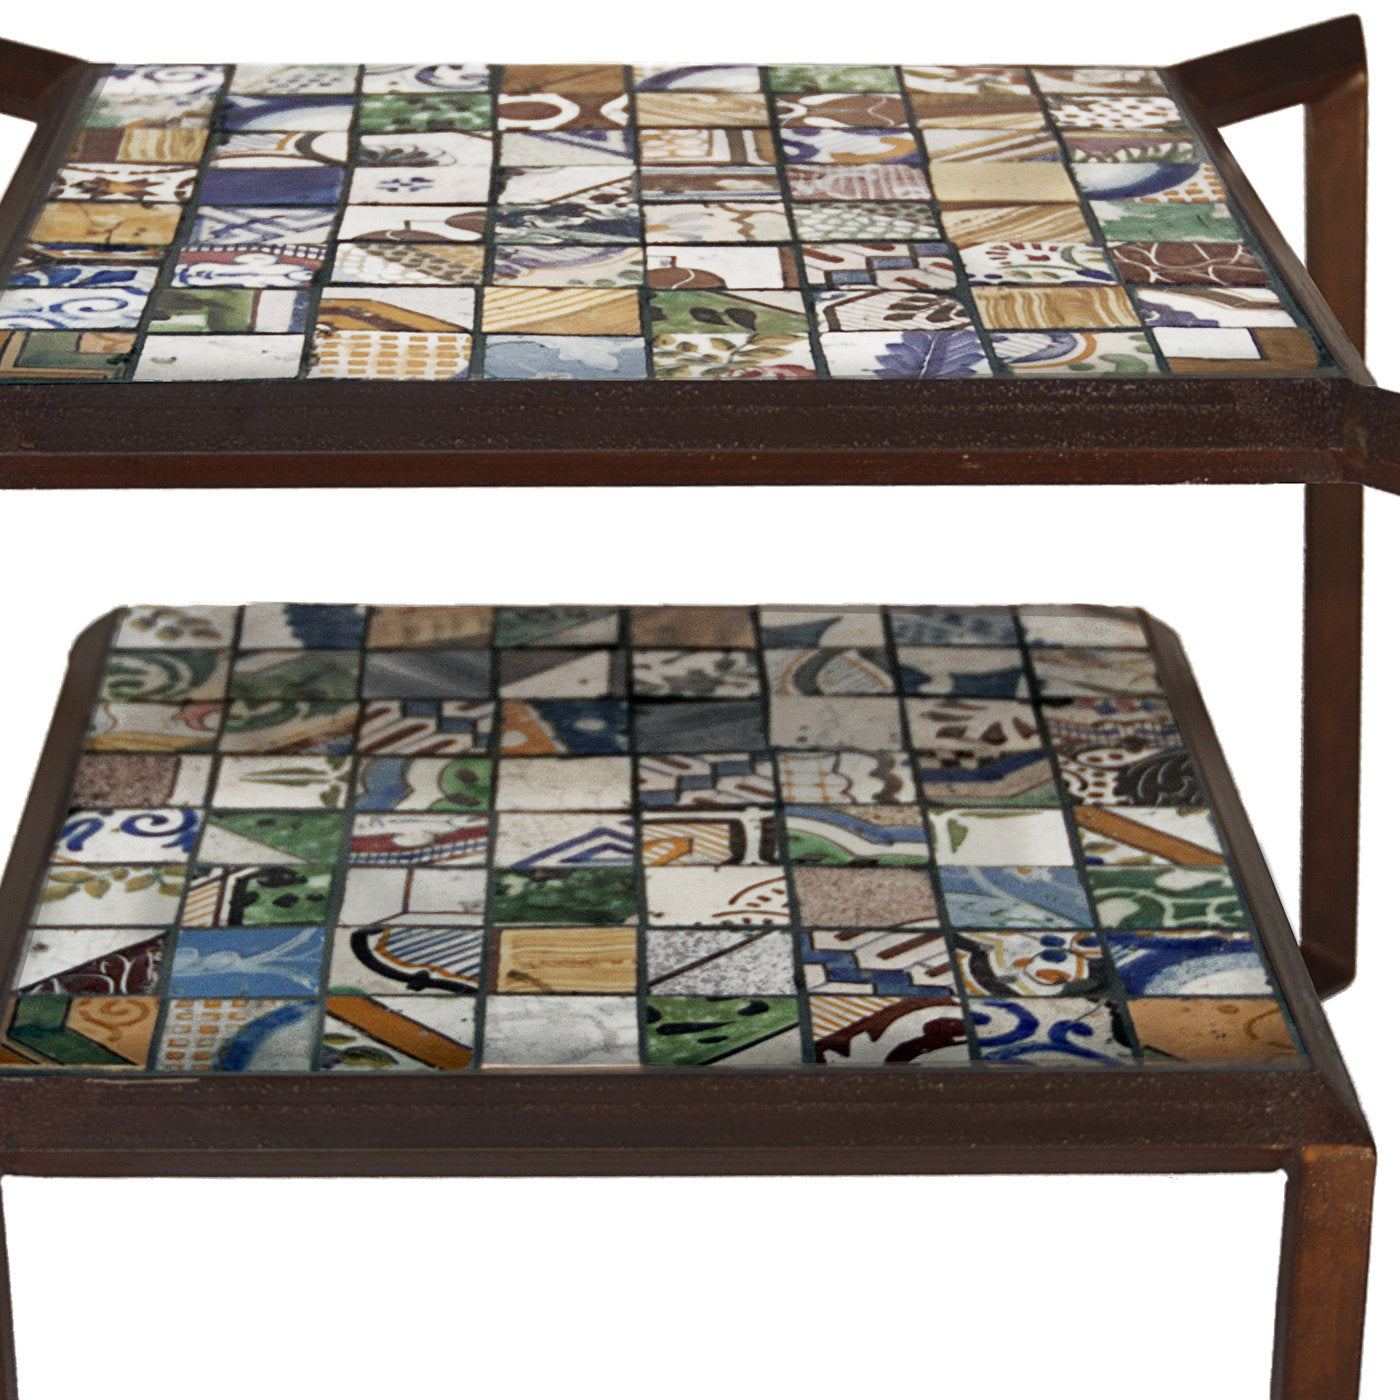 Spider Mosaic Tile Table - Alternative view 4